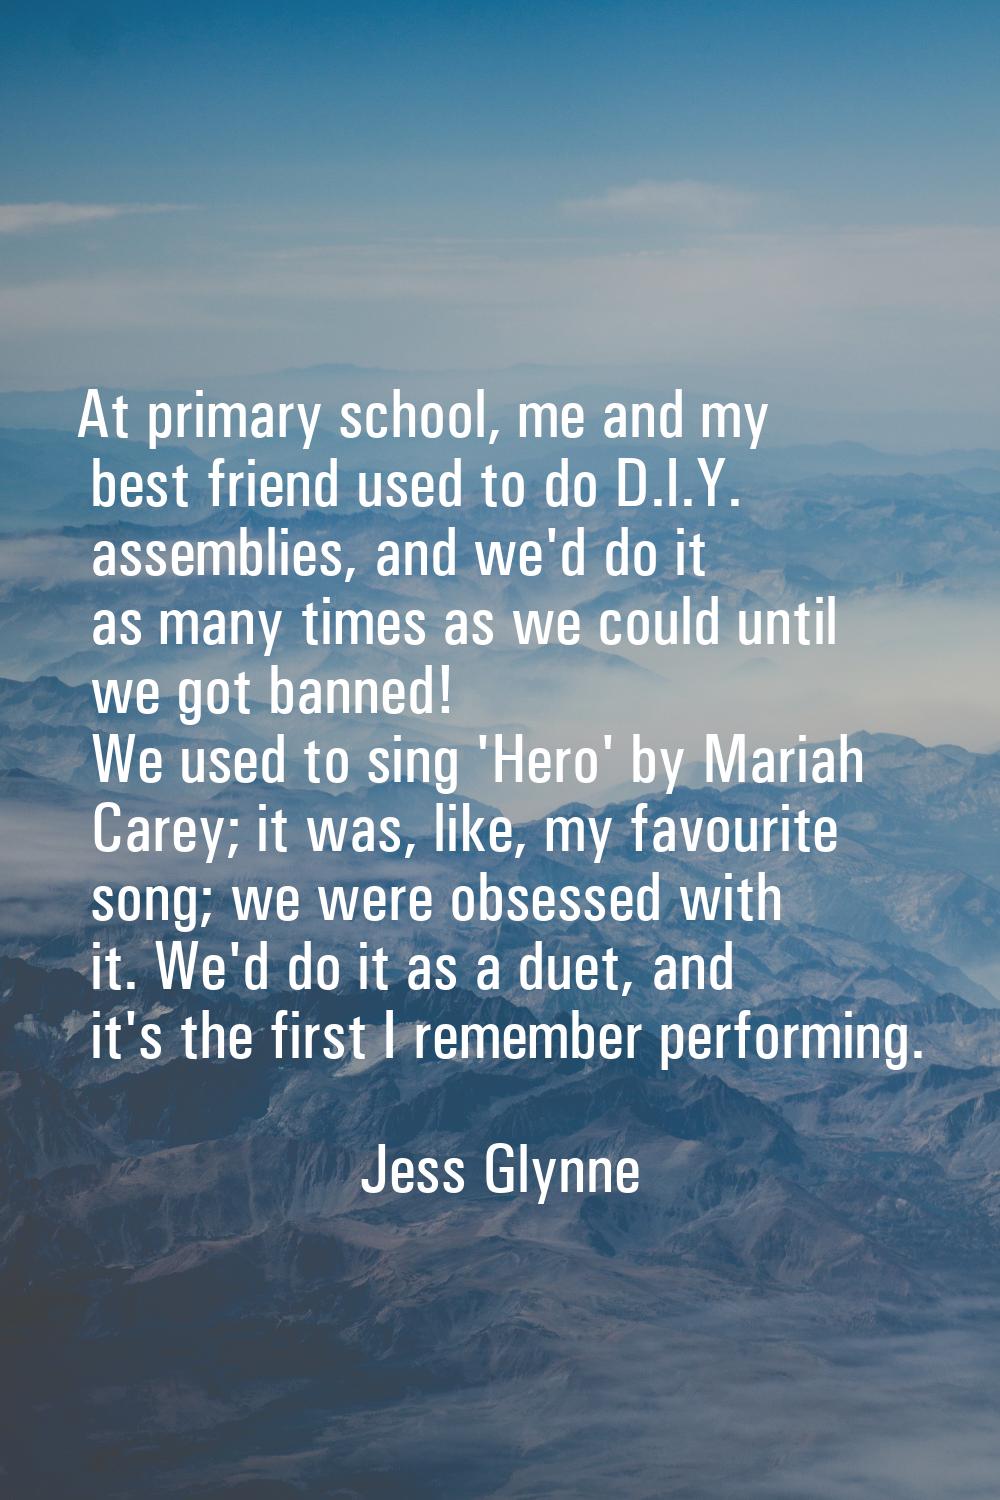 At primary school, me and my best friend used to do D.I.Y. assemblies, and we'd do it as many times